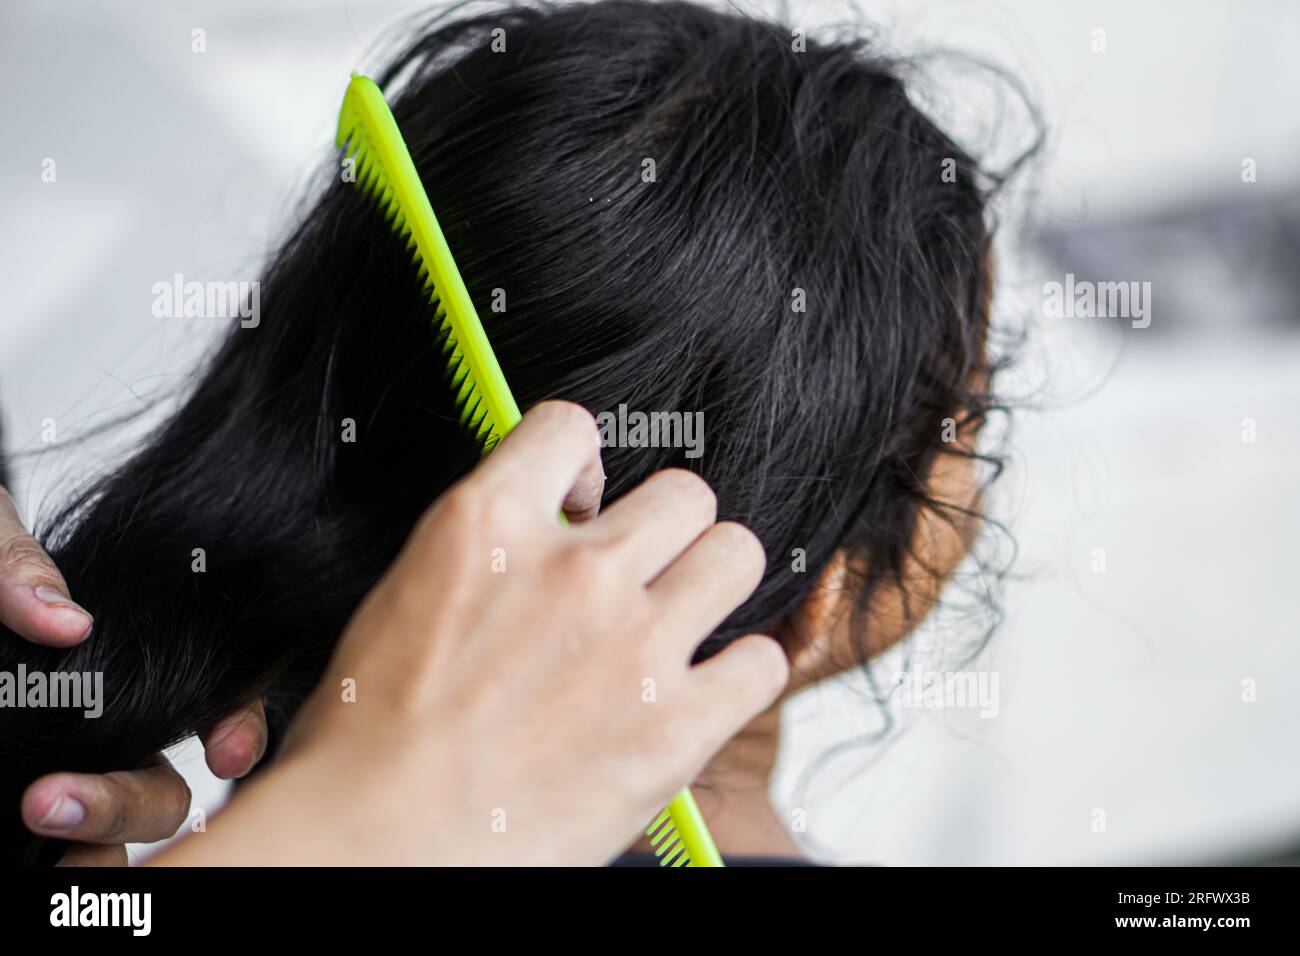 A mother combing her daughter's hair Stock Photo